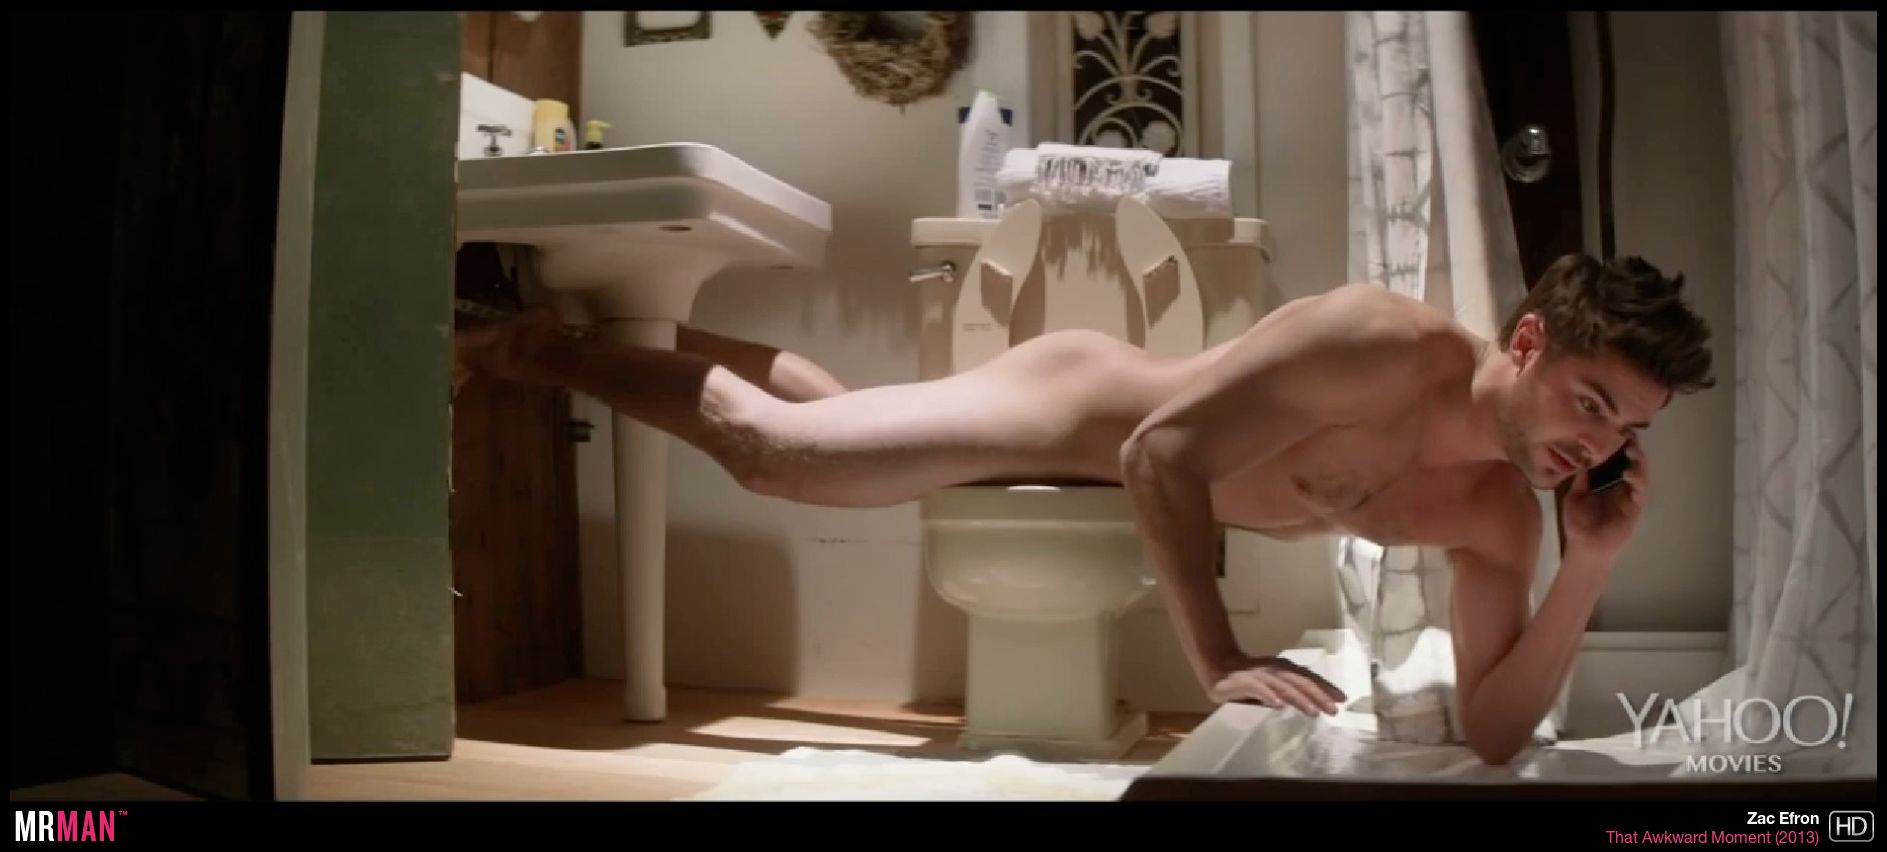 Zac Efron Butt Naked 6